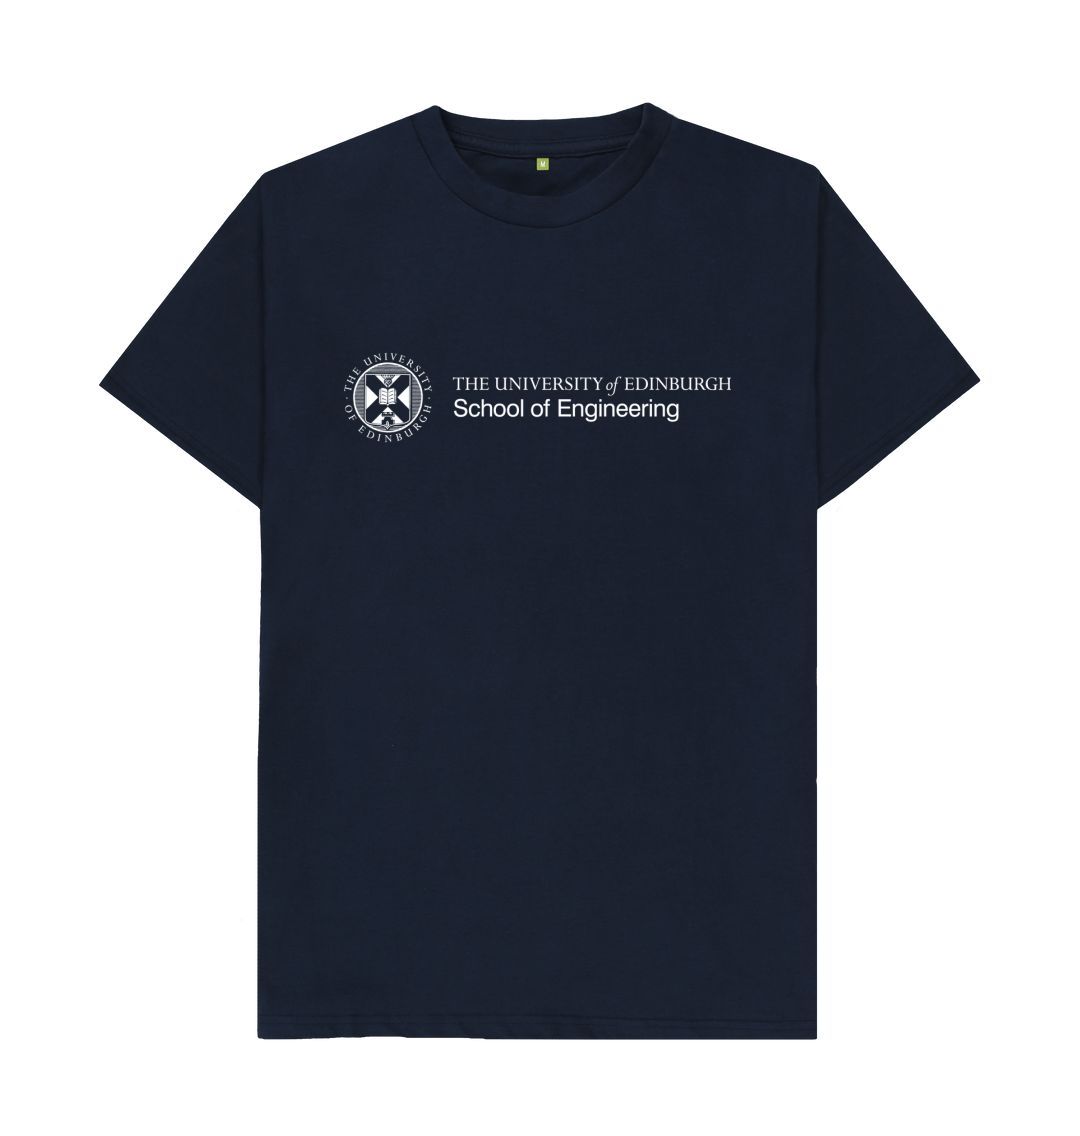 Navy T Shirt with white University crest and text that reads ' University of Edinburgh School of Engineering